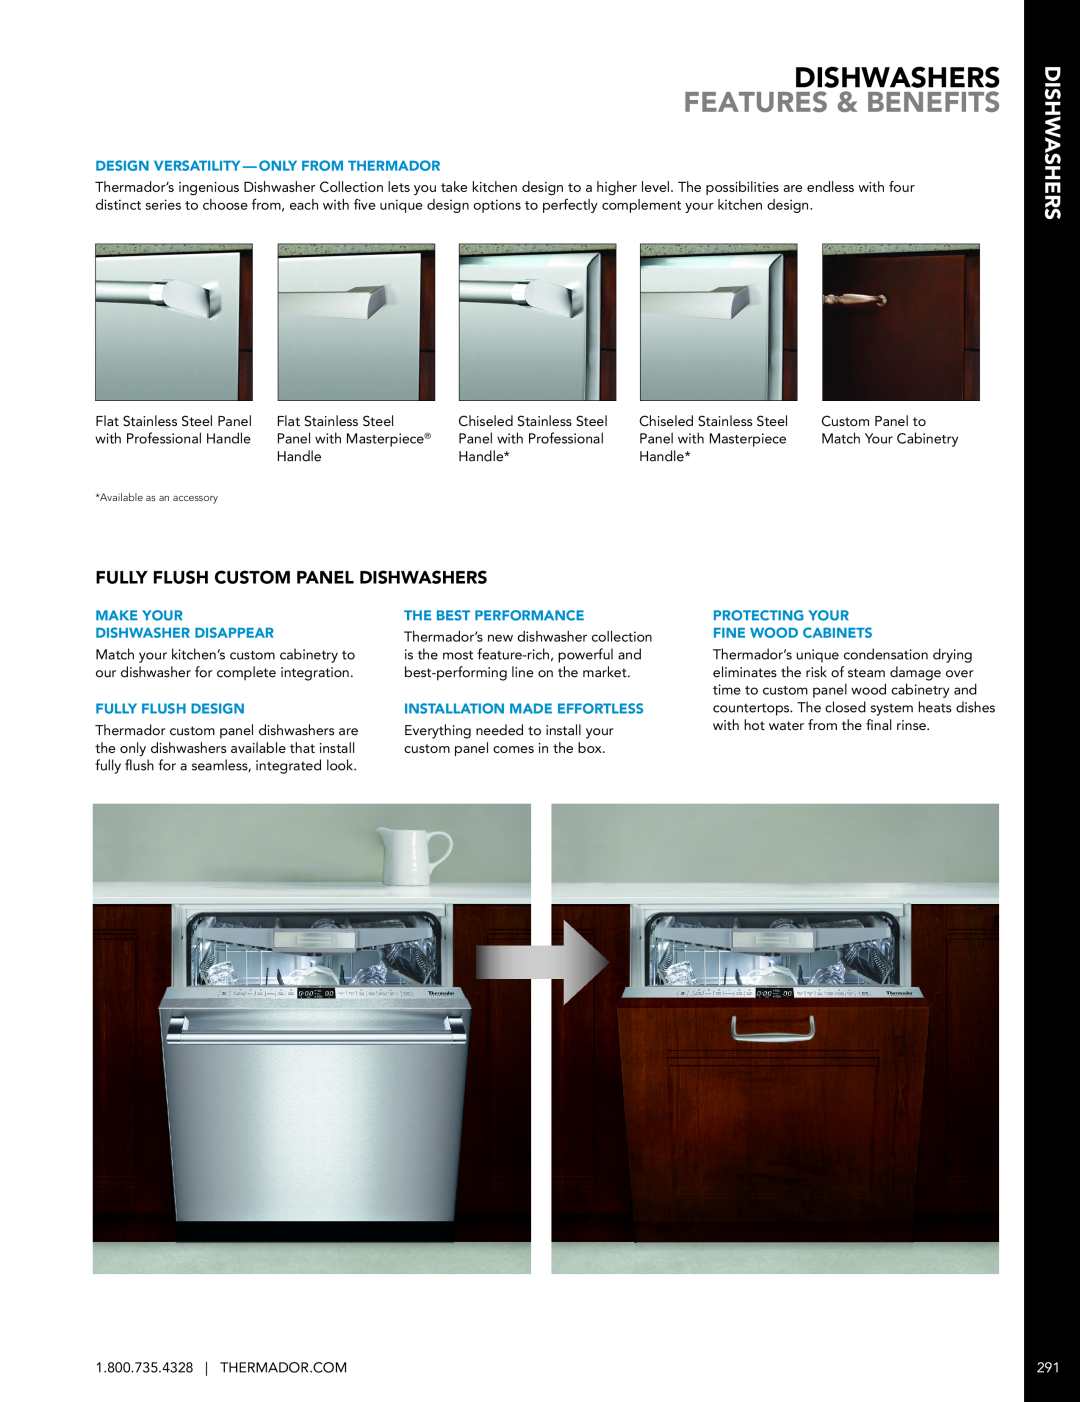 Miele DWHD651JFP manual Fully Flush Custom Panel Dishwashers, Features & Benefits, Design Versatility - Only From Thermador 